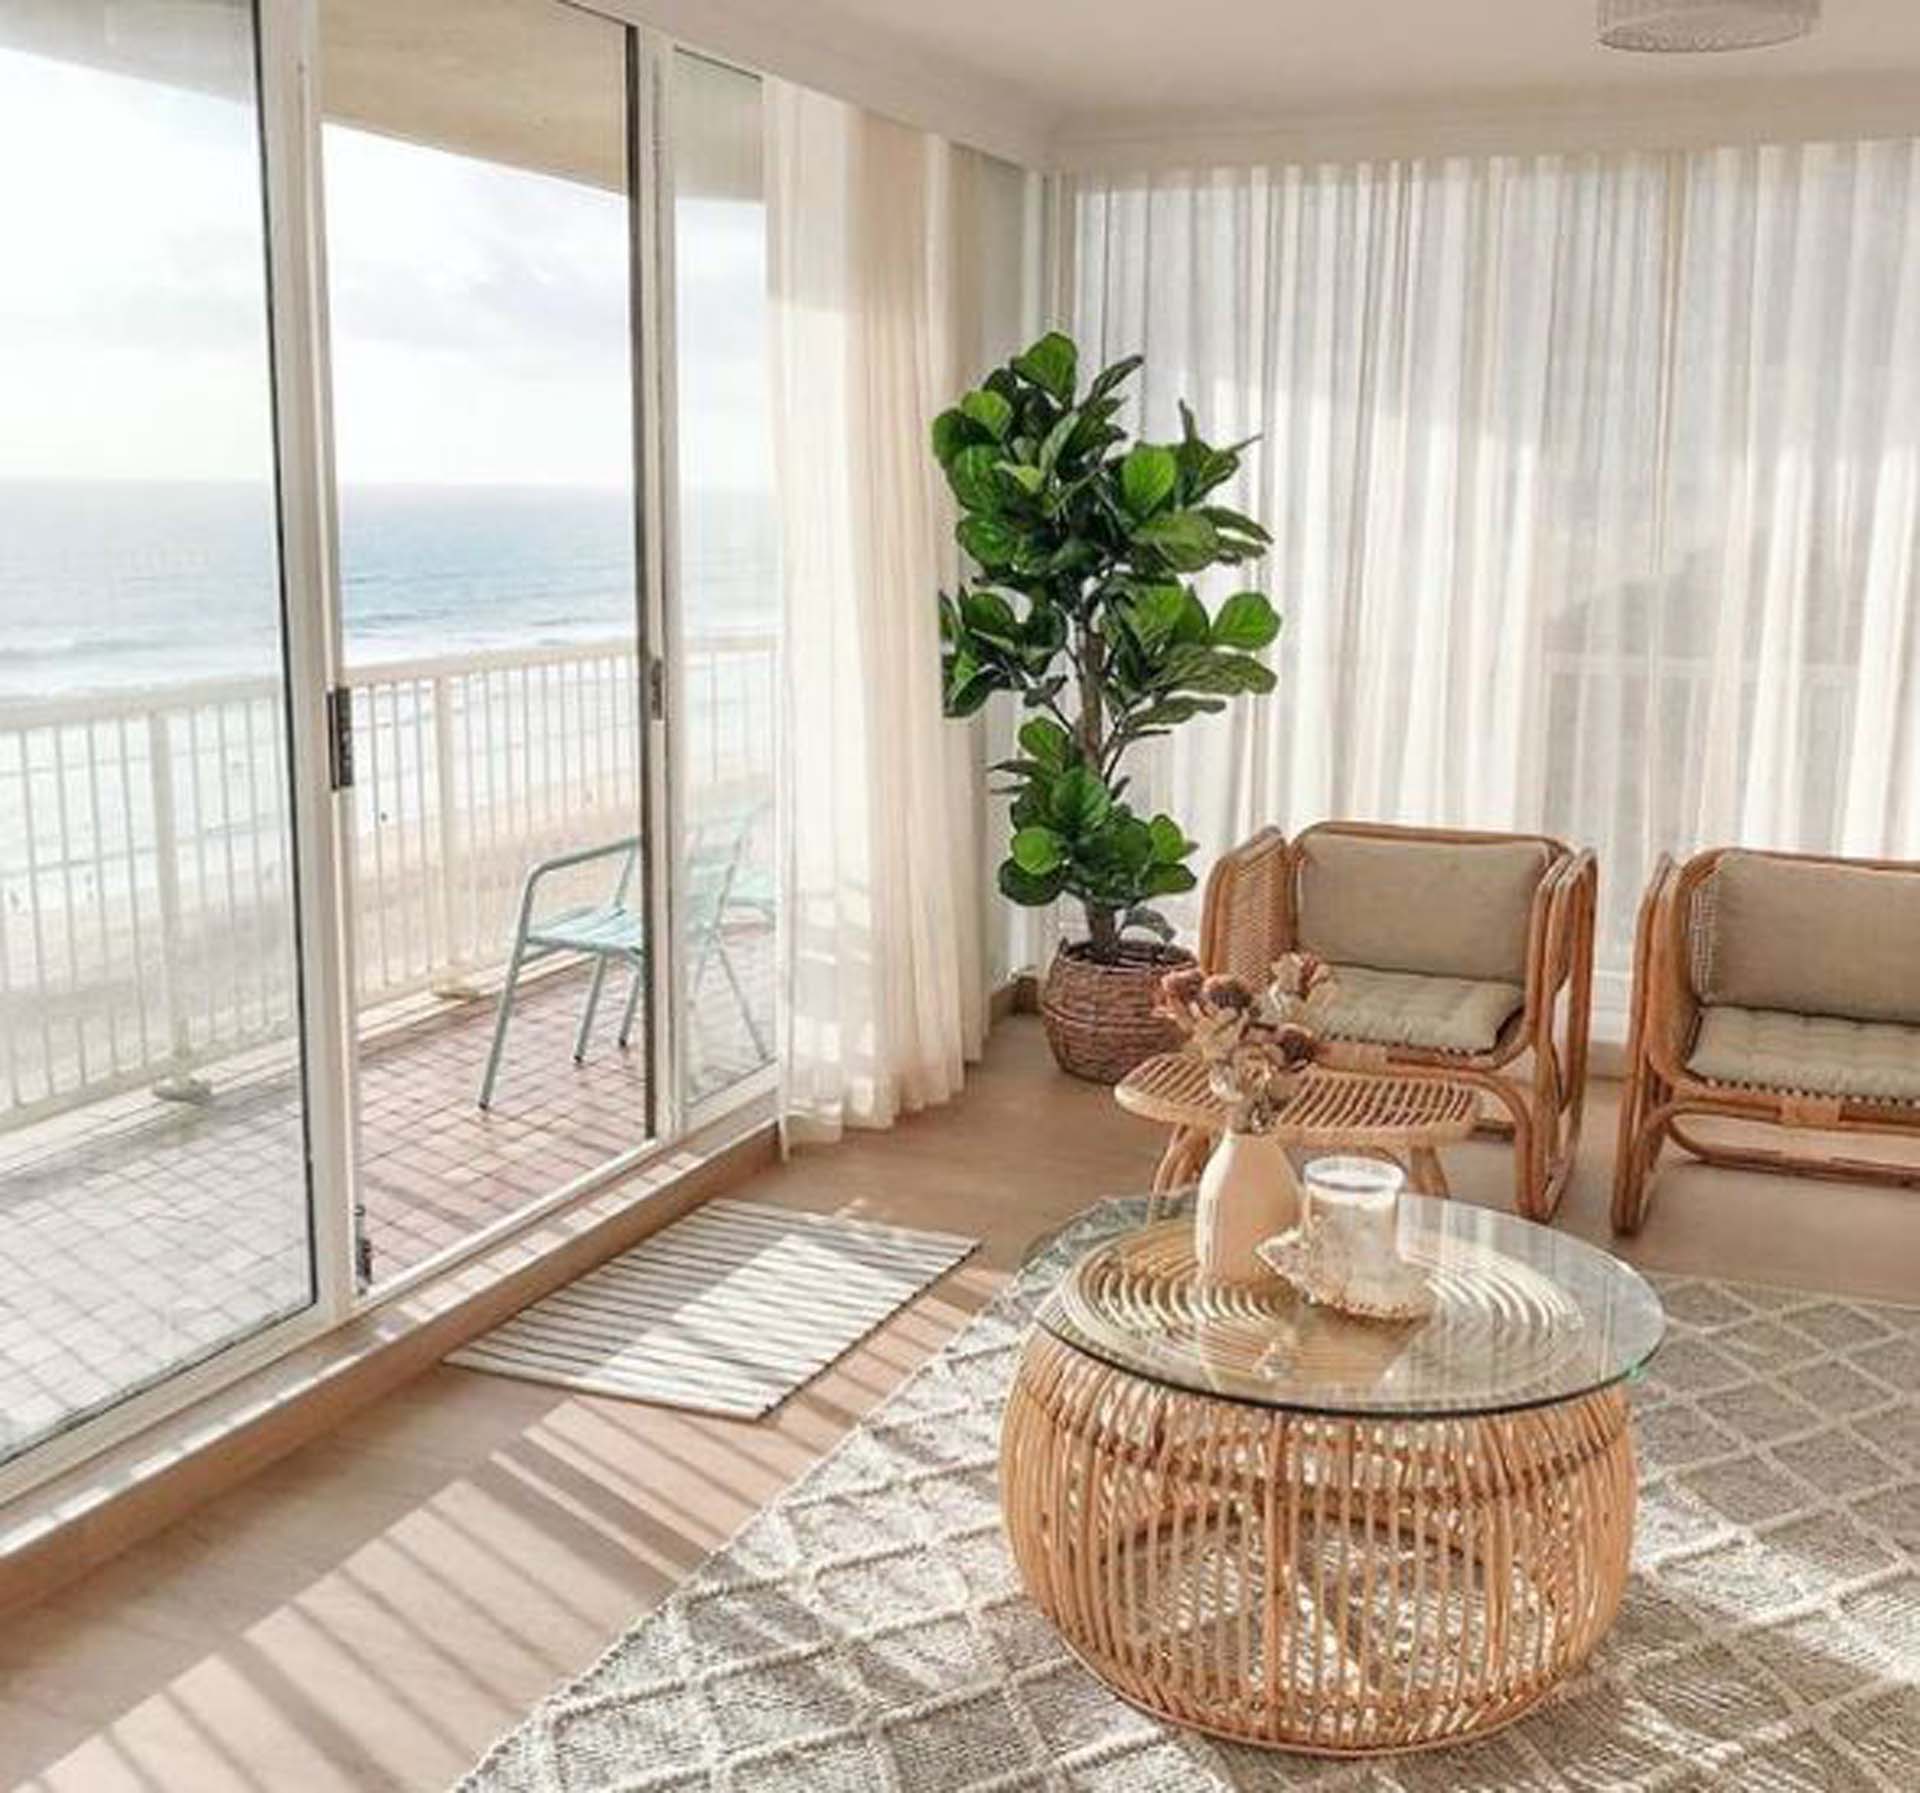 Living room with glass sliding door looking out over the ocean | Featured image for Bohemian Interior Design: A Decorator's Guide to All Things Boho. - Featured image for Bohemian Style Interior Design blog